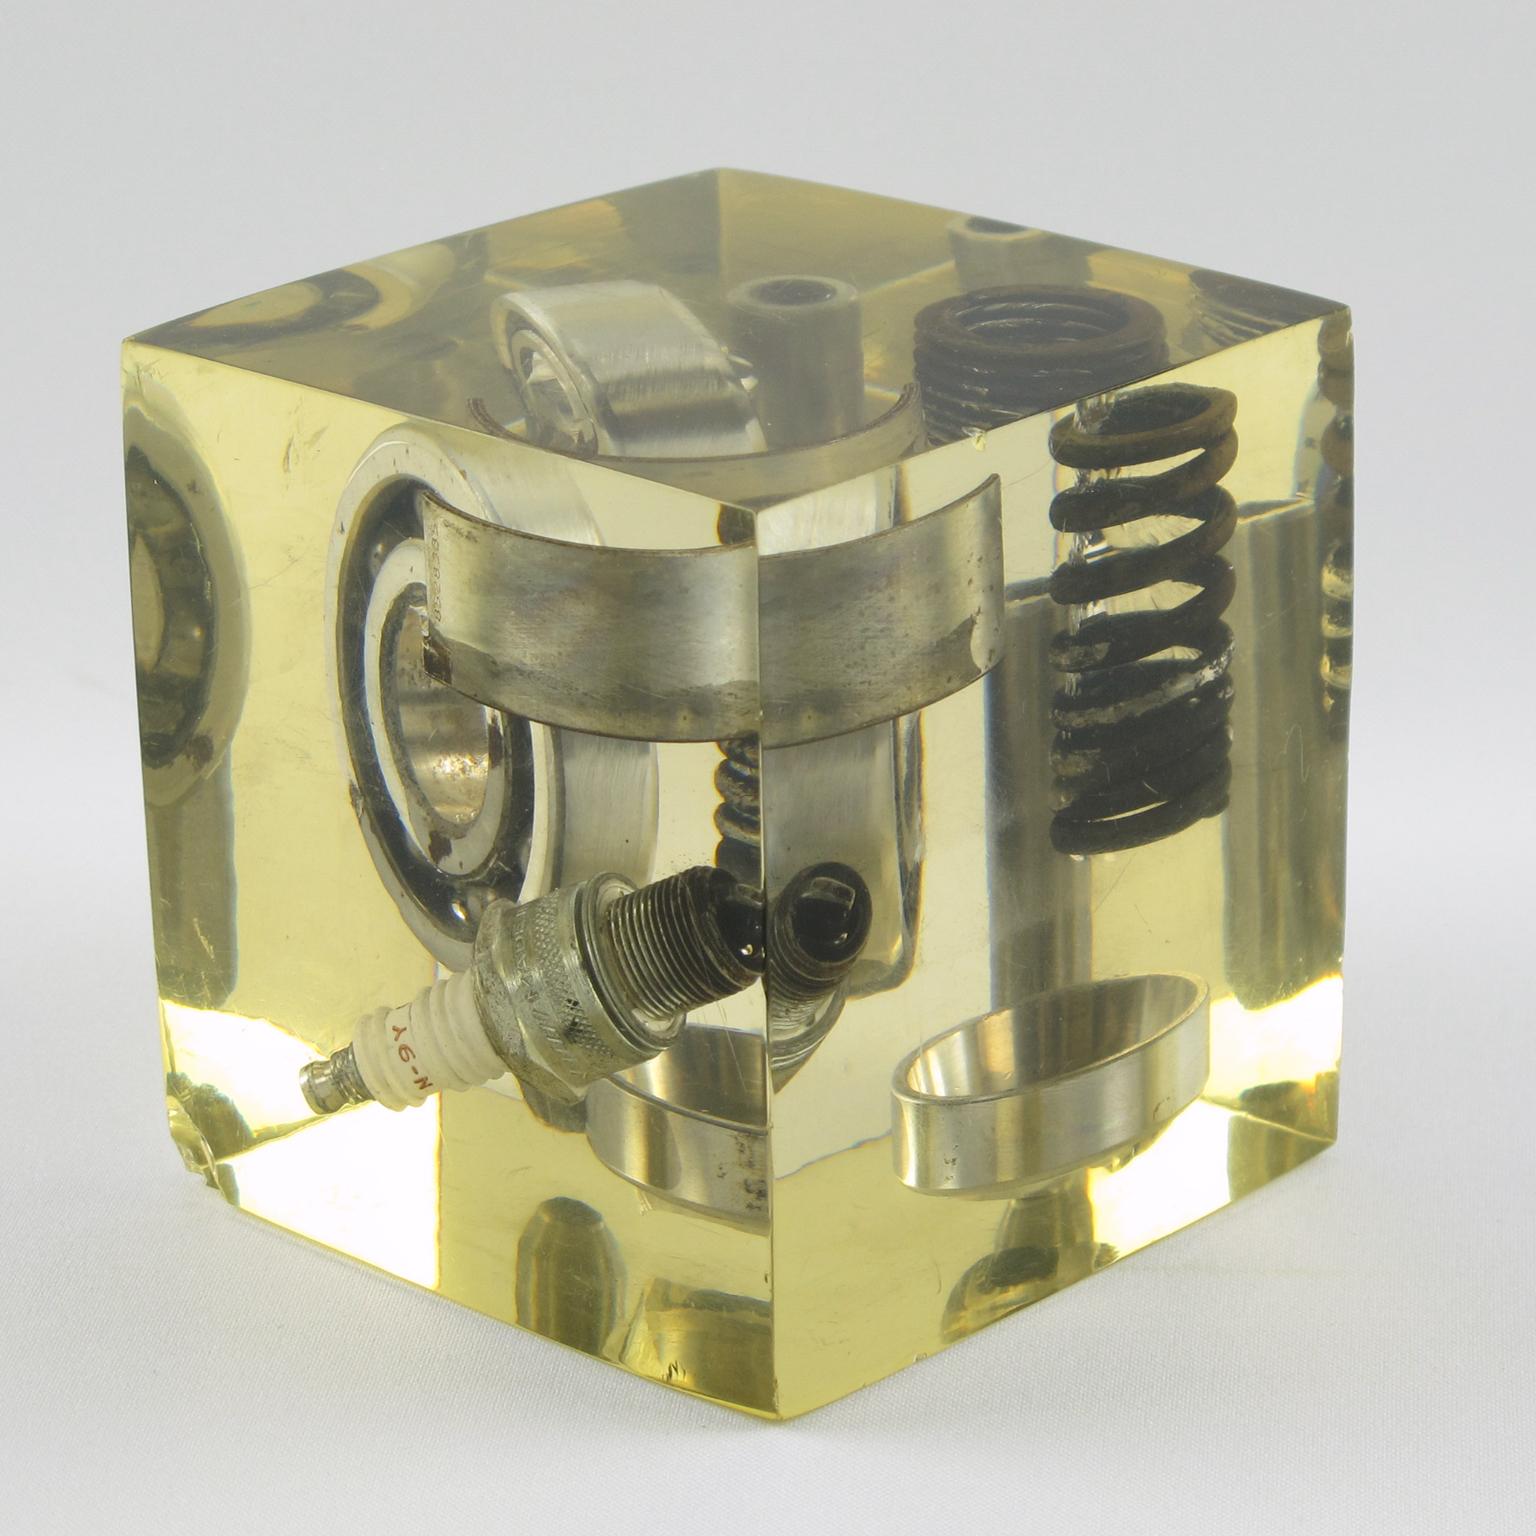 French Pierre Giraudon Resin Cube Sculpture Paperweight with Car Parts Inclusions 1970s For Sale